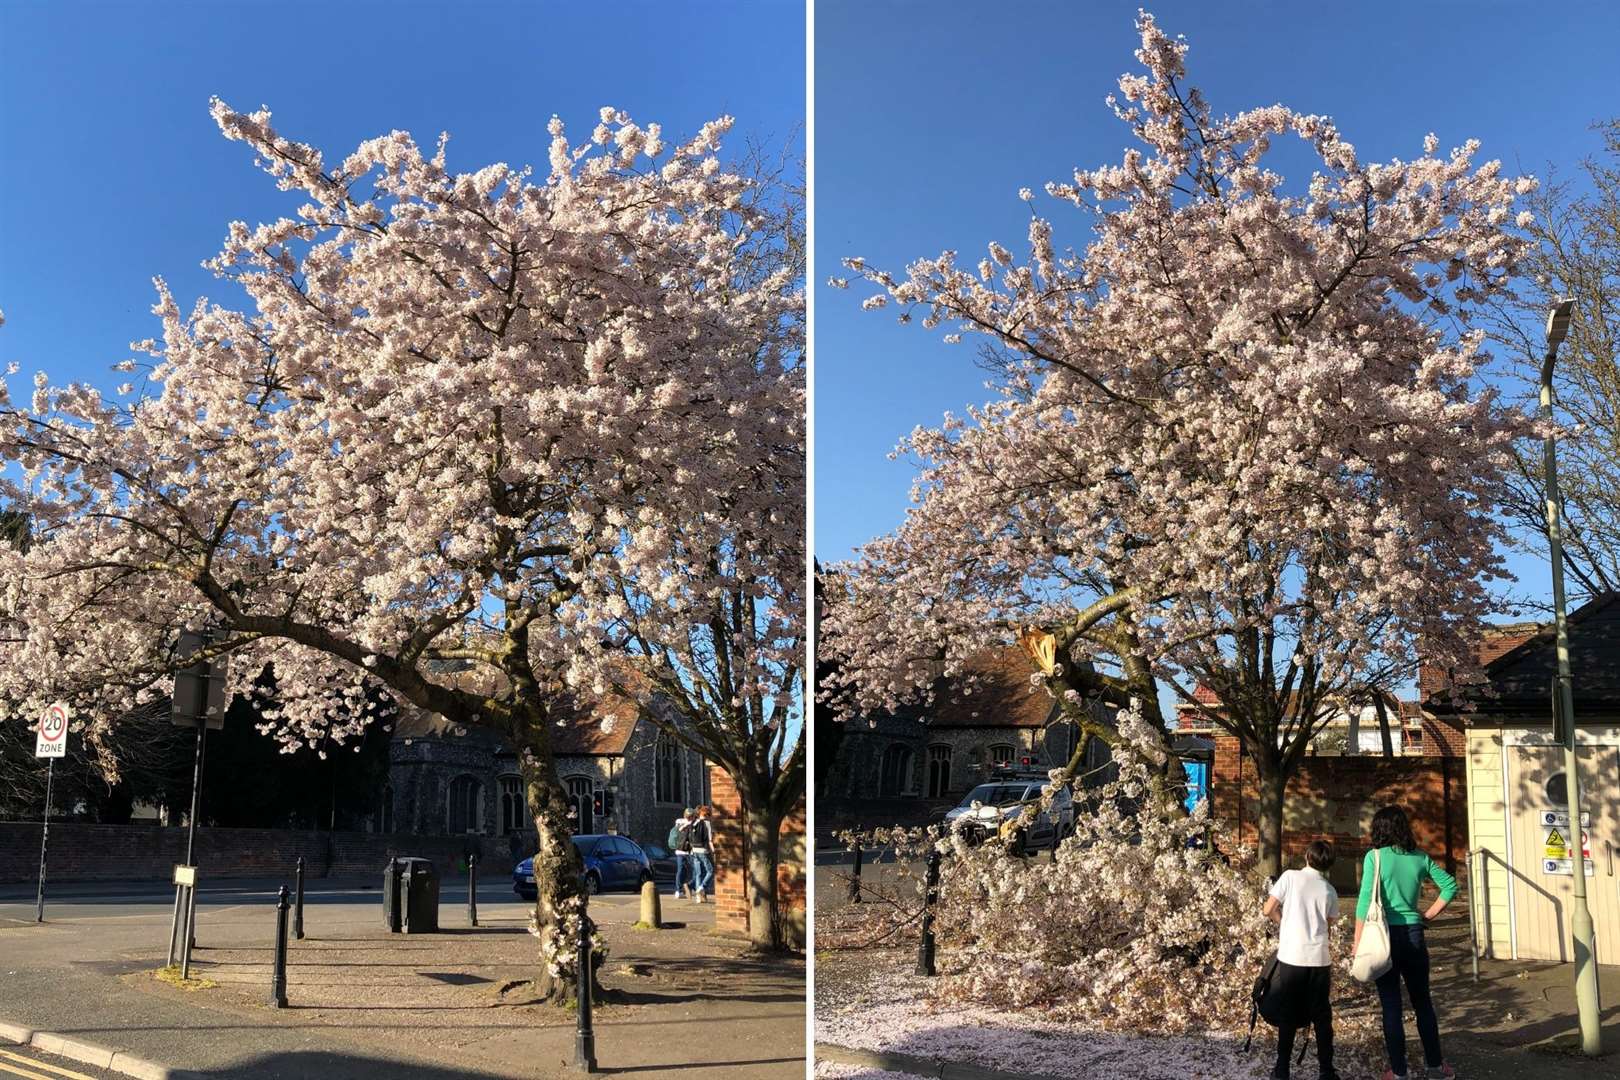 The cherry tree - before and after the damage